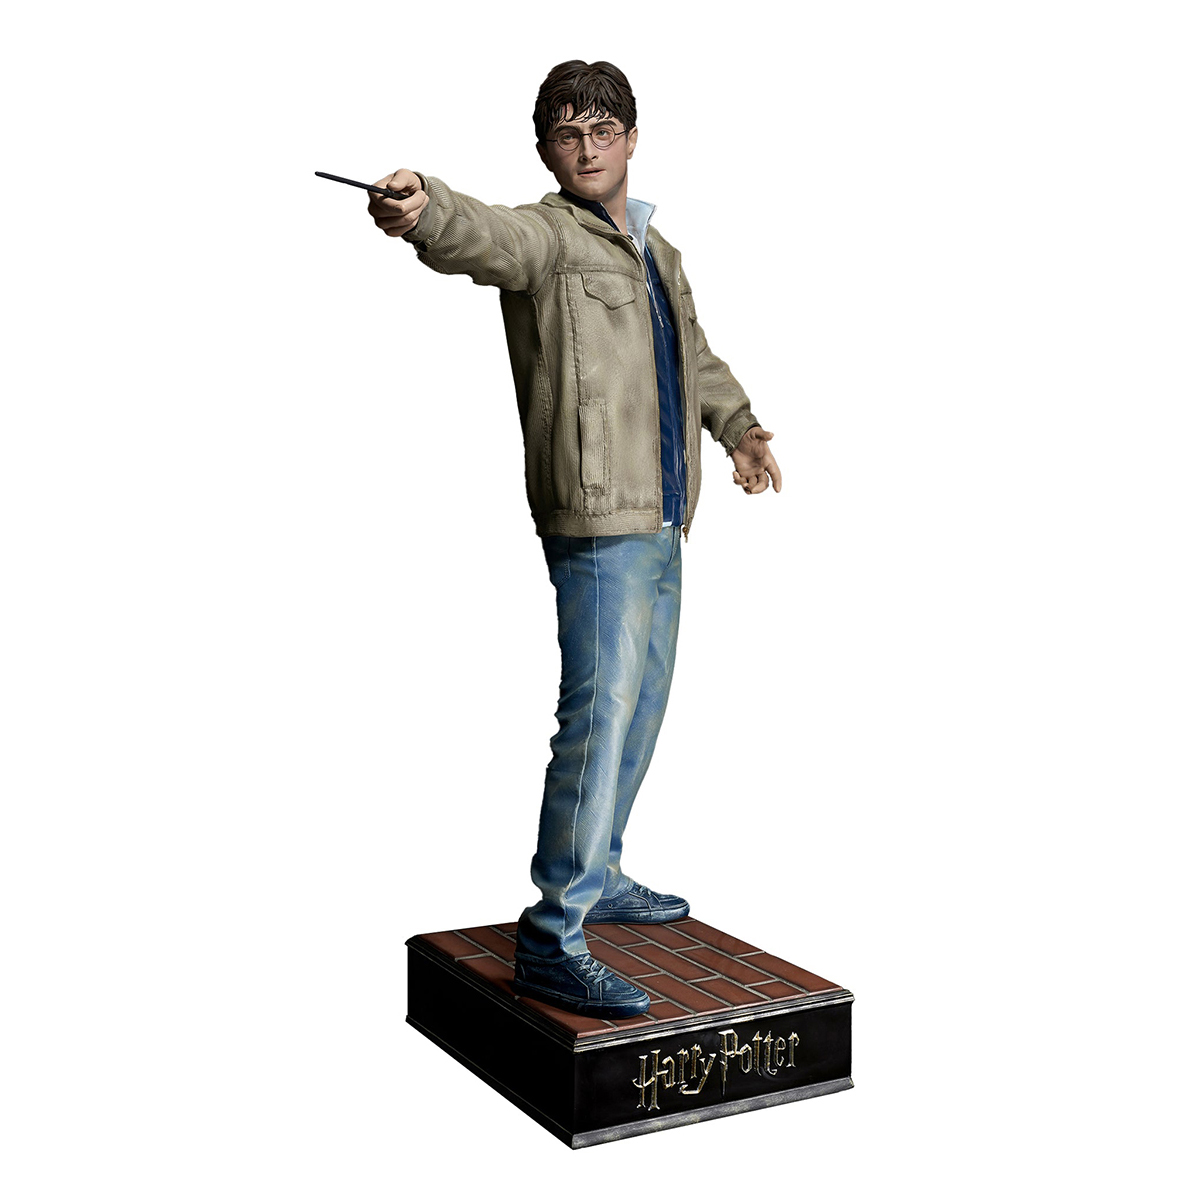 Statue of Harry Potter